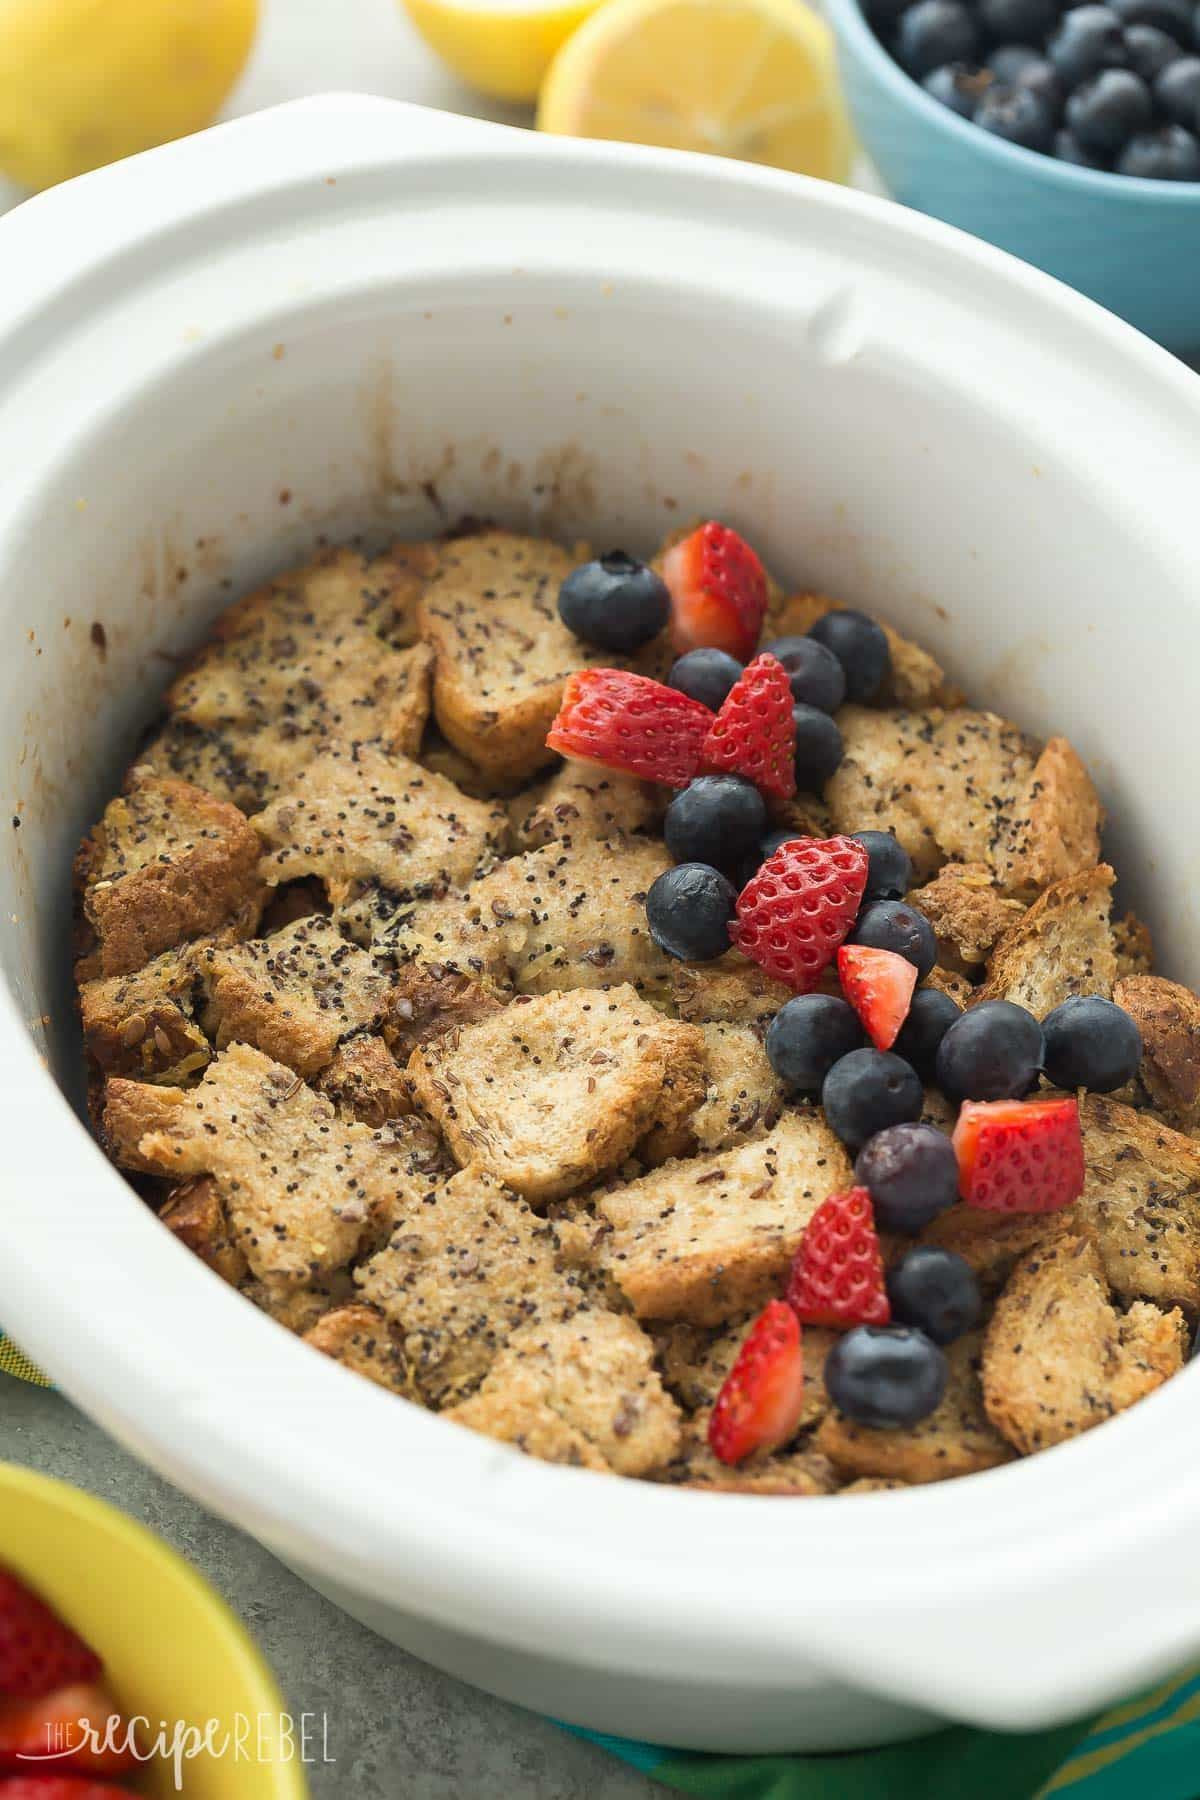 Slow Cooker French Toast Allrecipes
 This Slow Cooker Lemon Poppy Seed French Toast is an easy